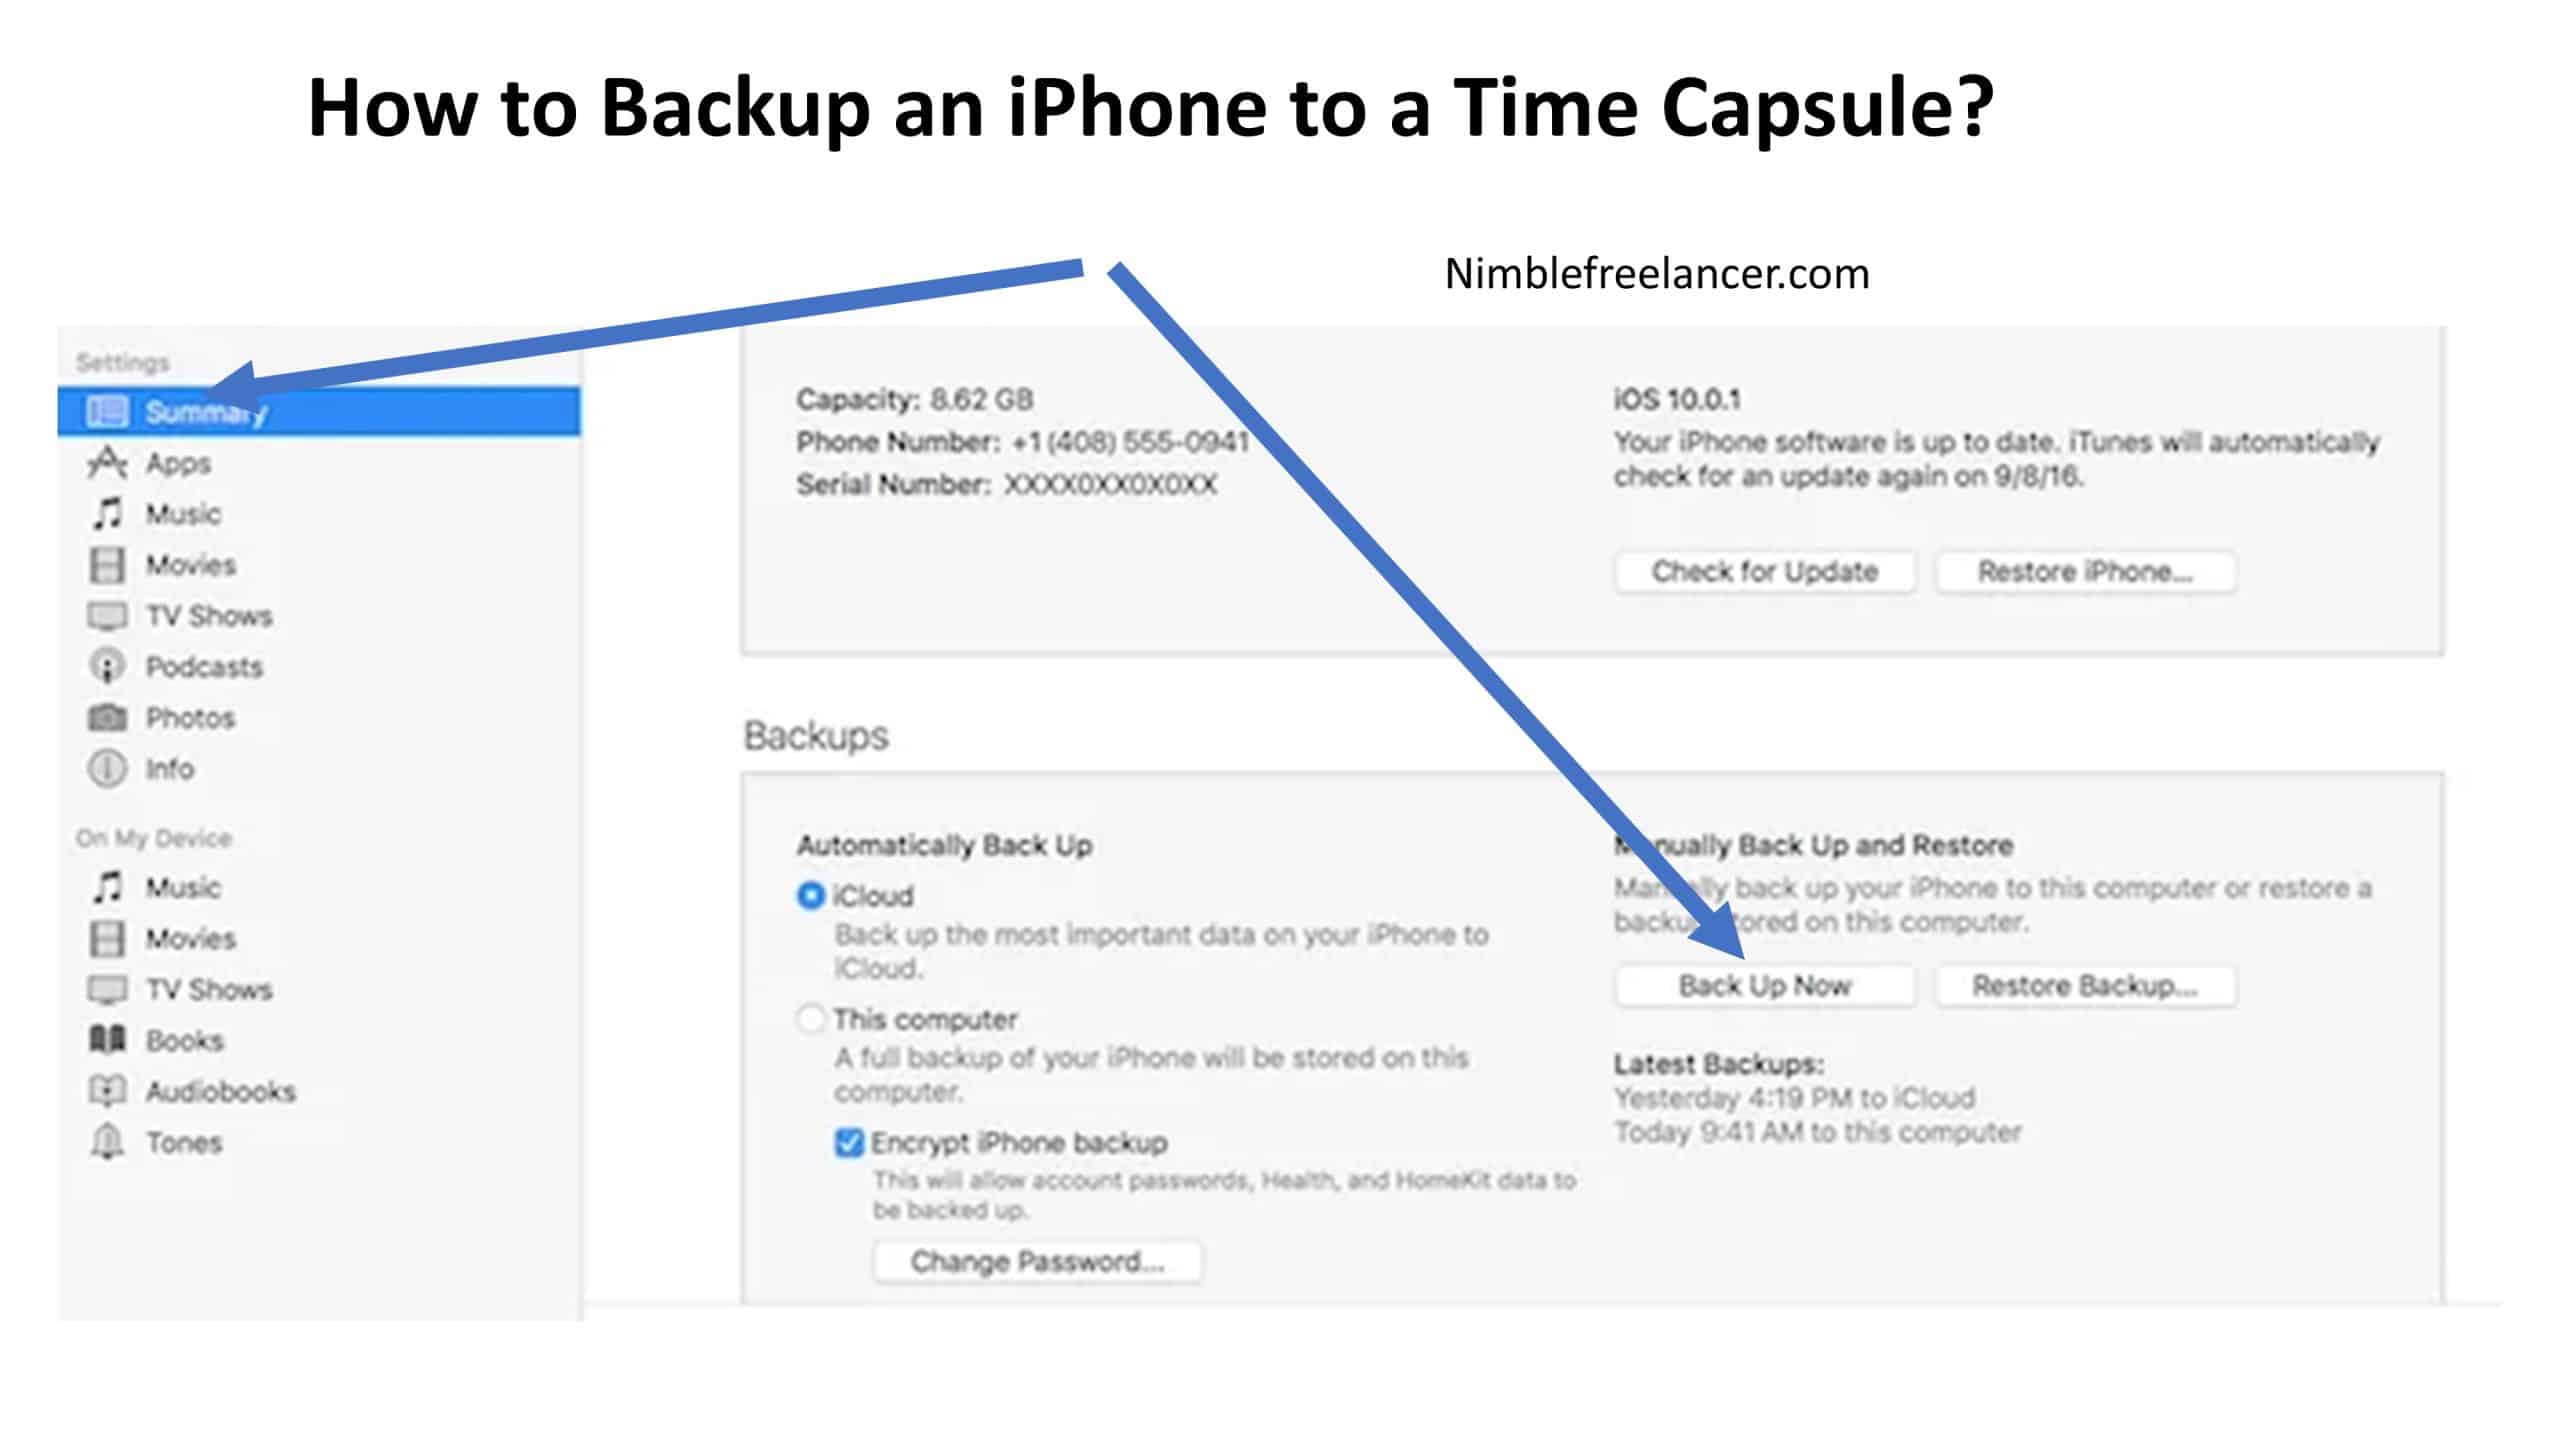 How to Backup an iPhone to a Time Capsule